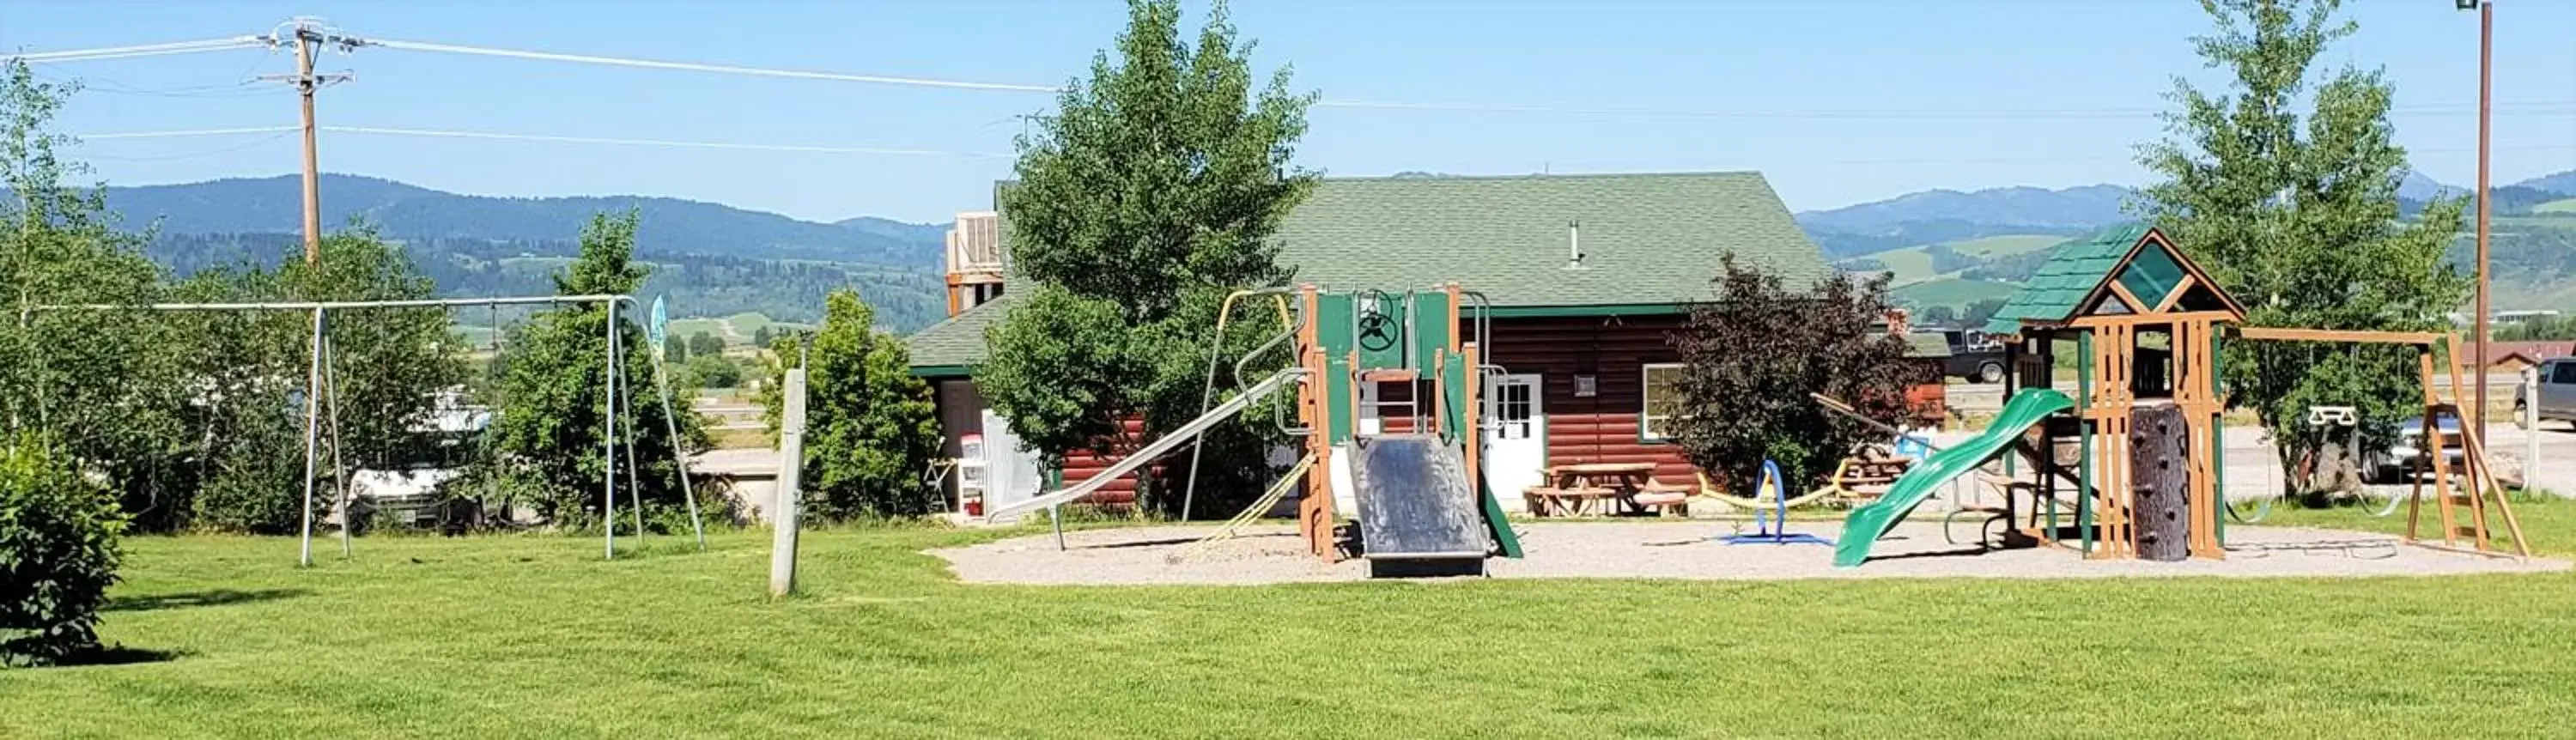 Other, Children's Play Area in Wolf Den Log Cabin Motel and RV Park